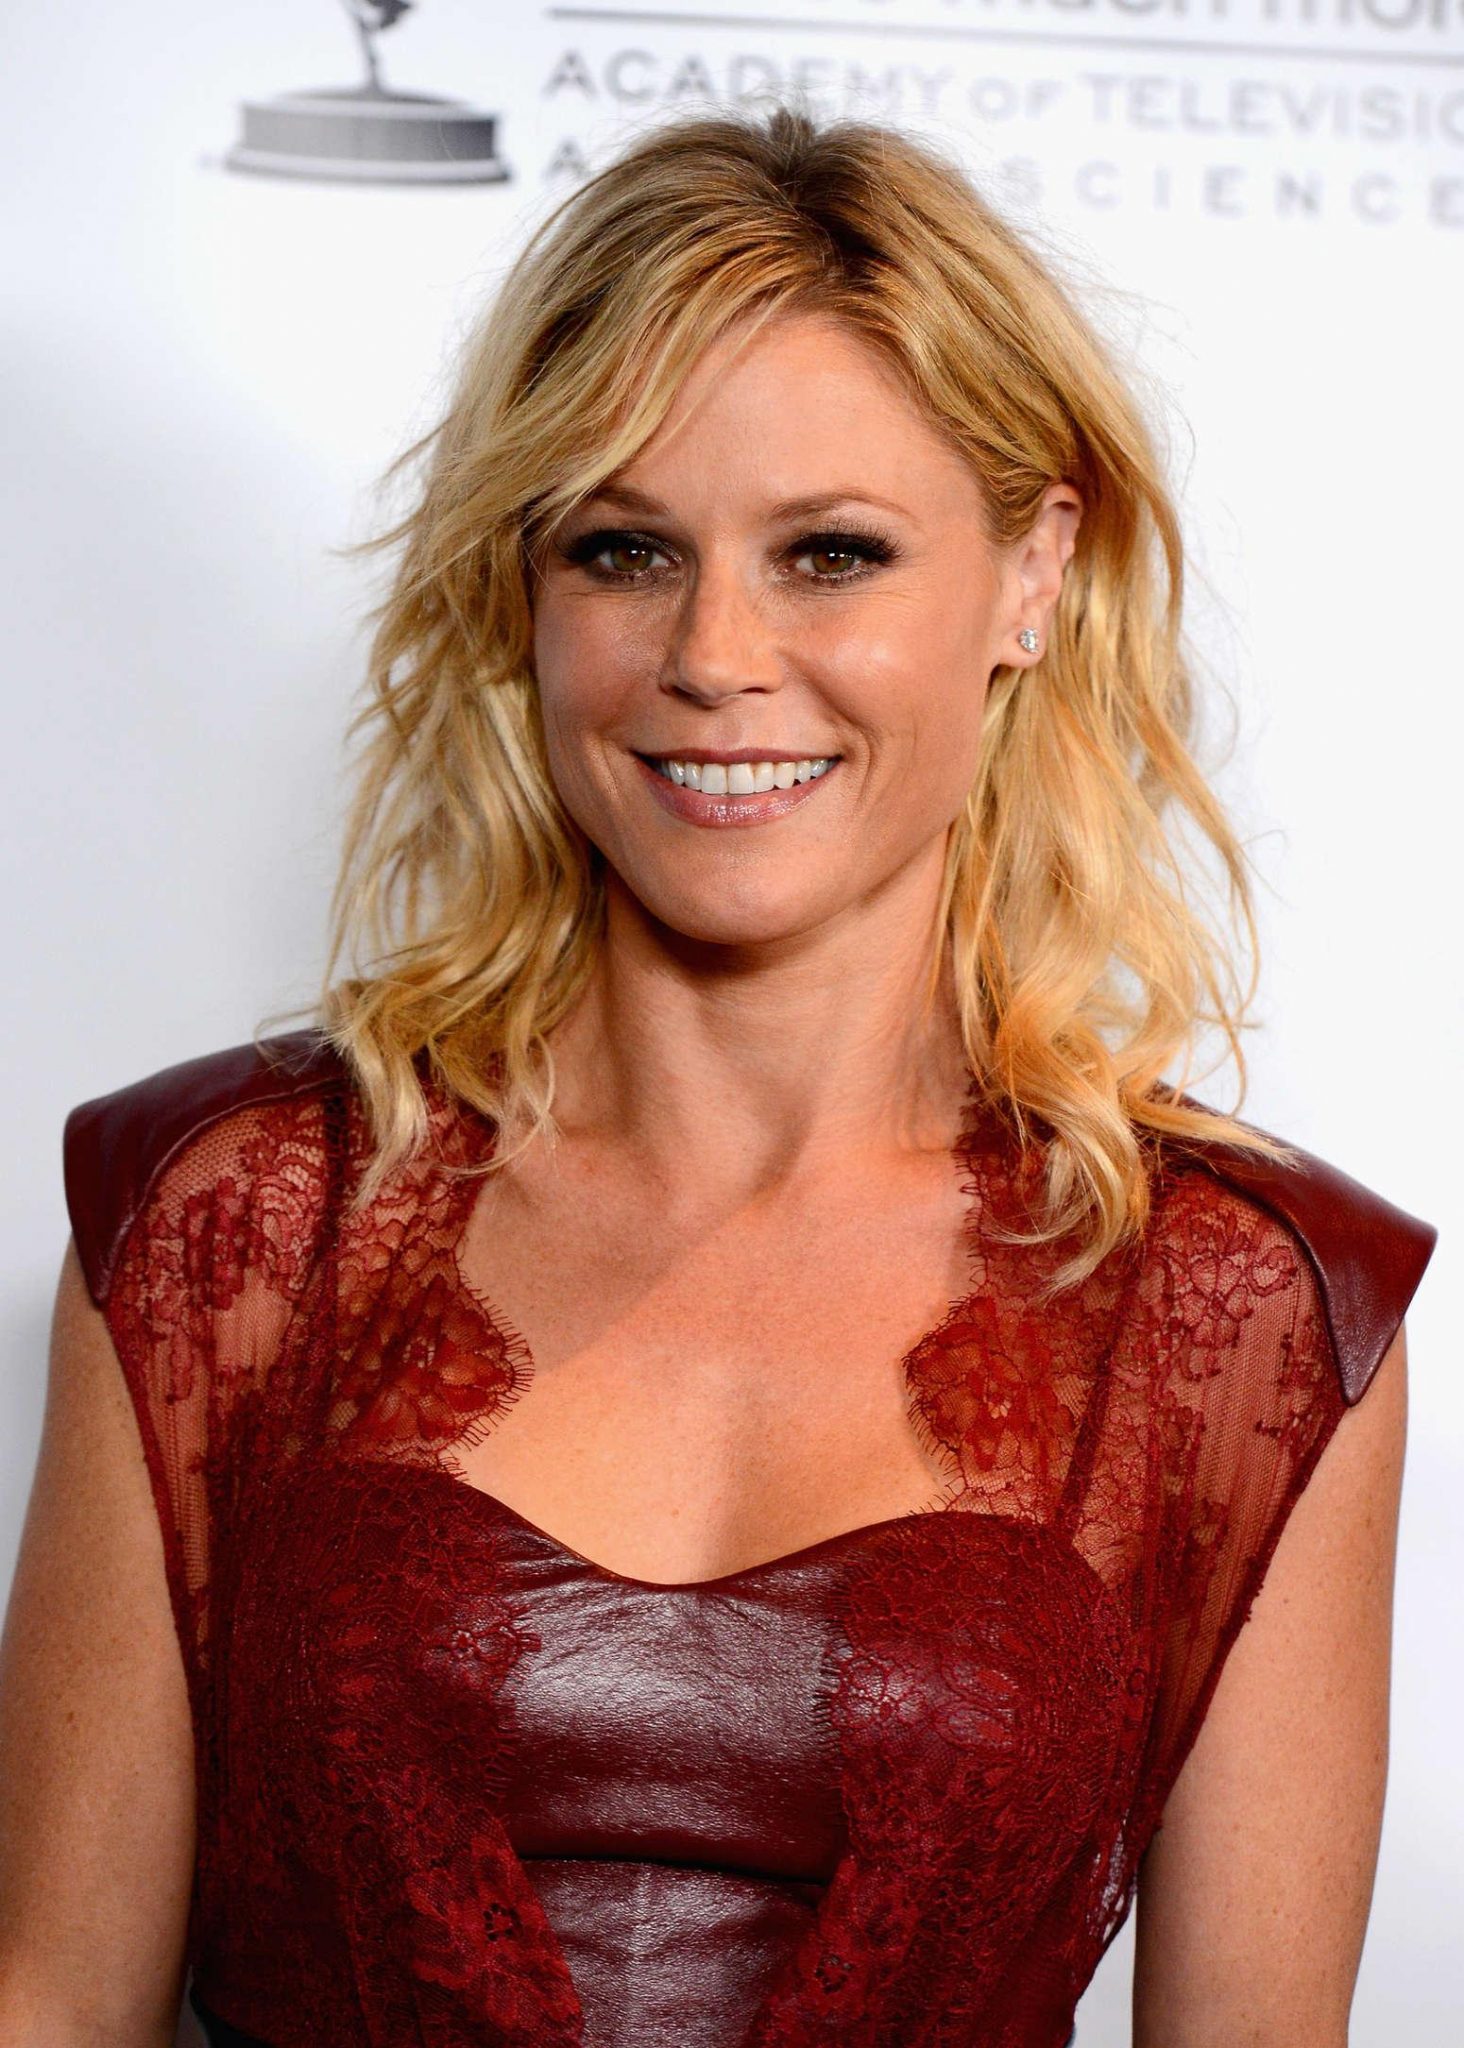 49 Julie Bowen Nude Pictures Are Sure To Keep You At The Edge Of Your Seat 42